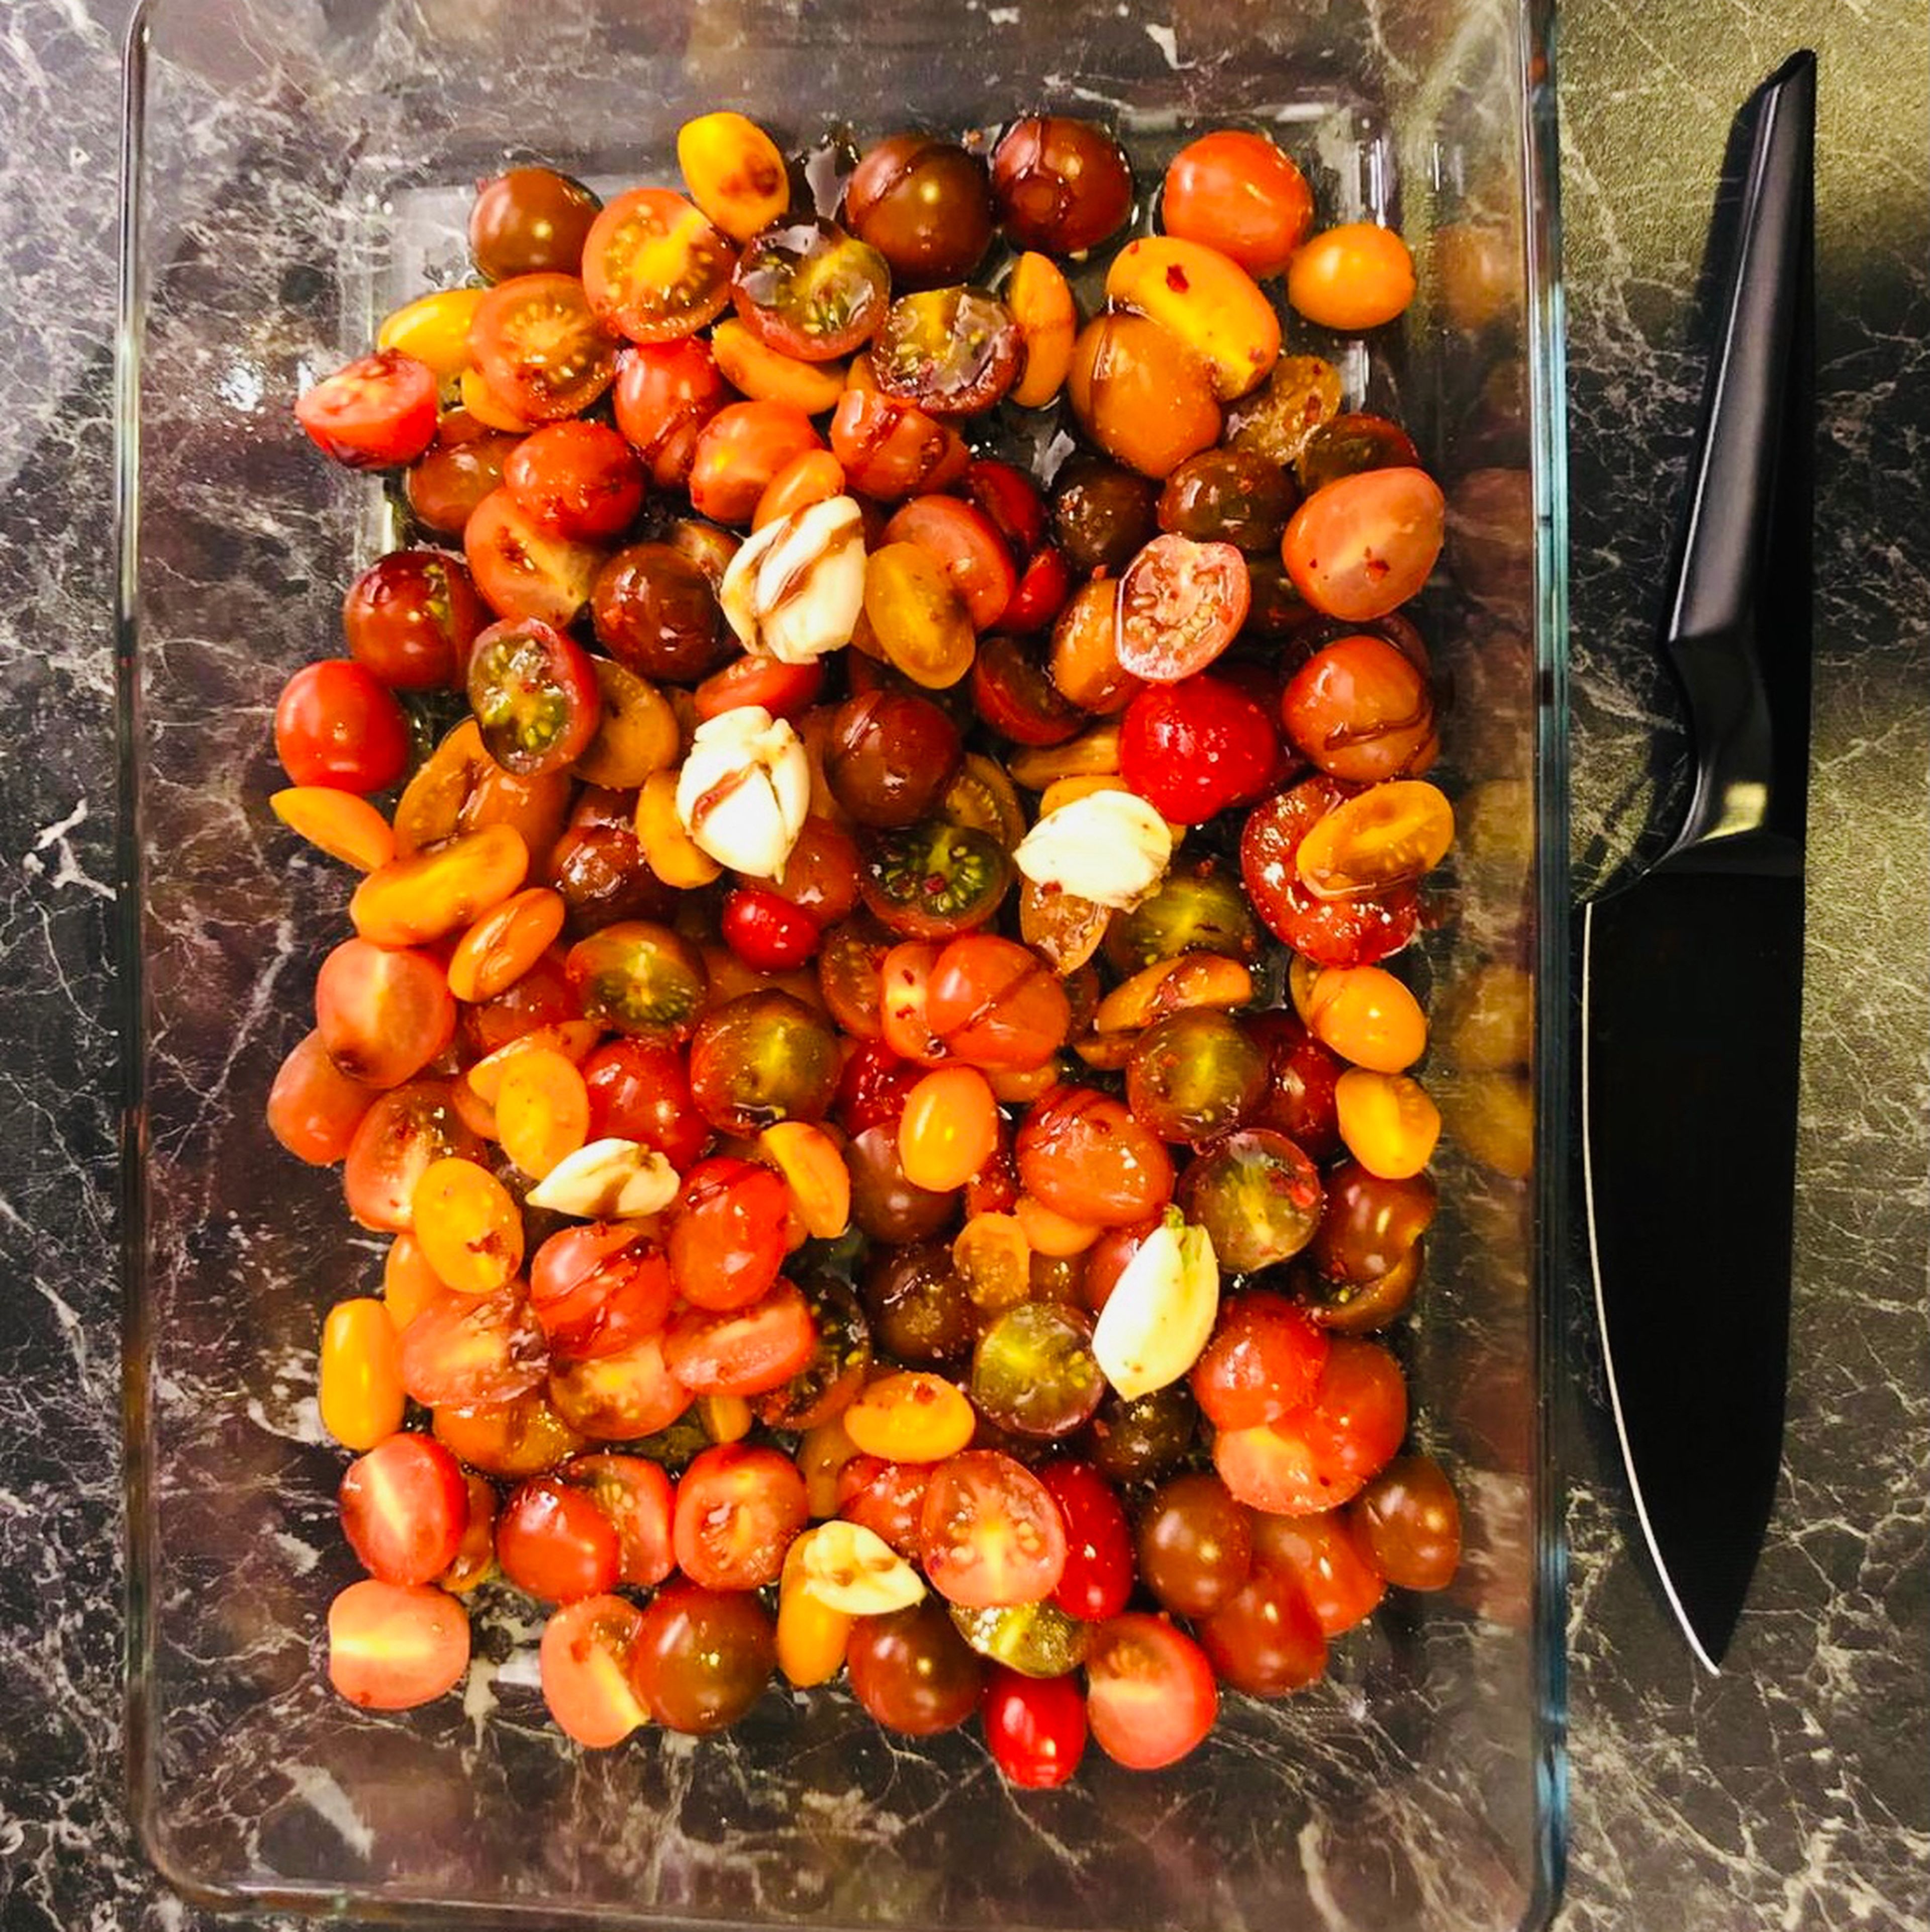 Preheat the oven to 180 degrees C fan. Cut the tomatoes in half, peel the garlic and crush them with the side of the knife. Then place them all together in the oven dish. Spoon 1/2 (50 ml) of the oliveoil, the sugar beet syrup, the chili flakes and 1/2 teaspoon of salt on the tomatoe-garlic mix. Note: You can easily use 1/2 tablespoon sugar or honey instead of the sugar beet syrup.